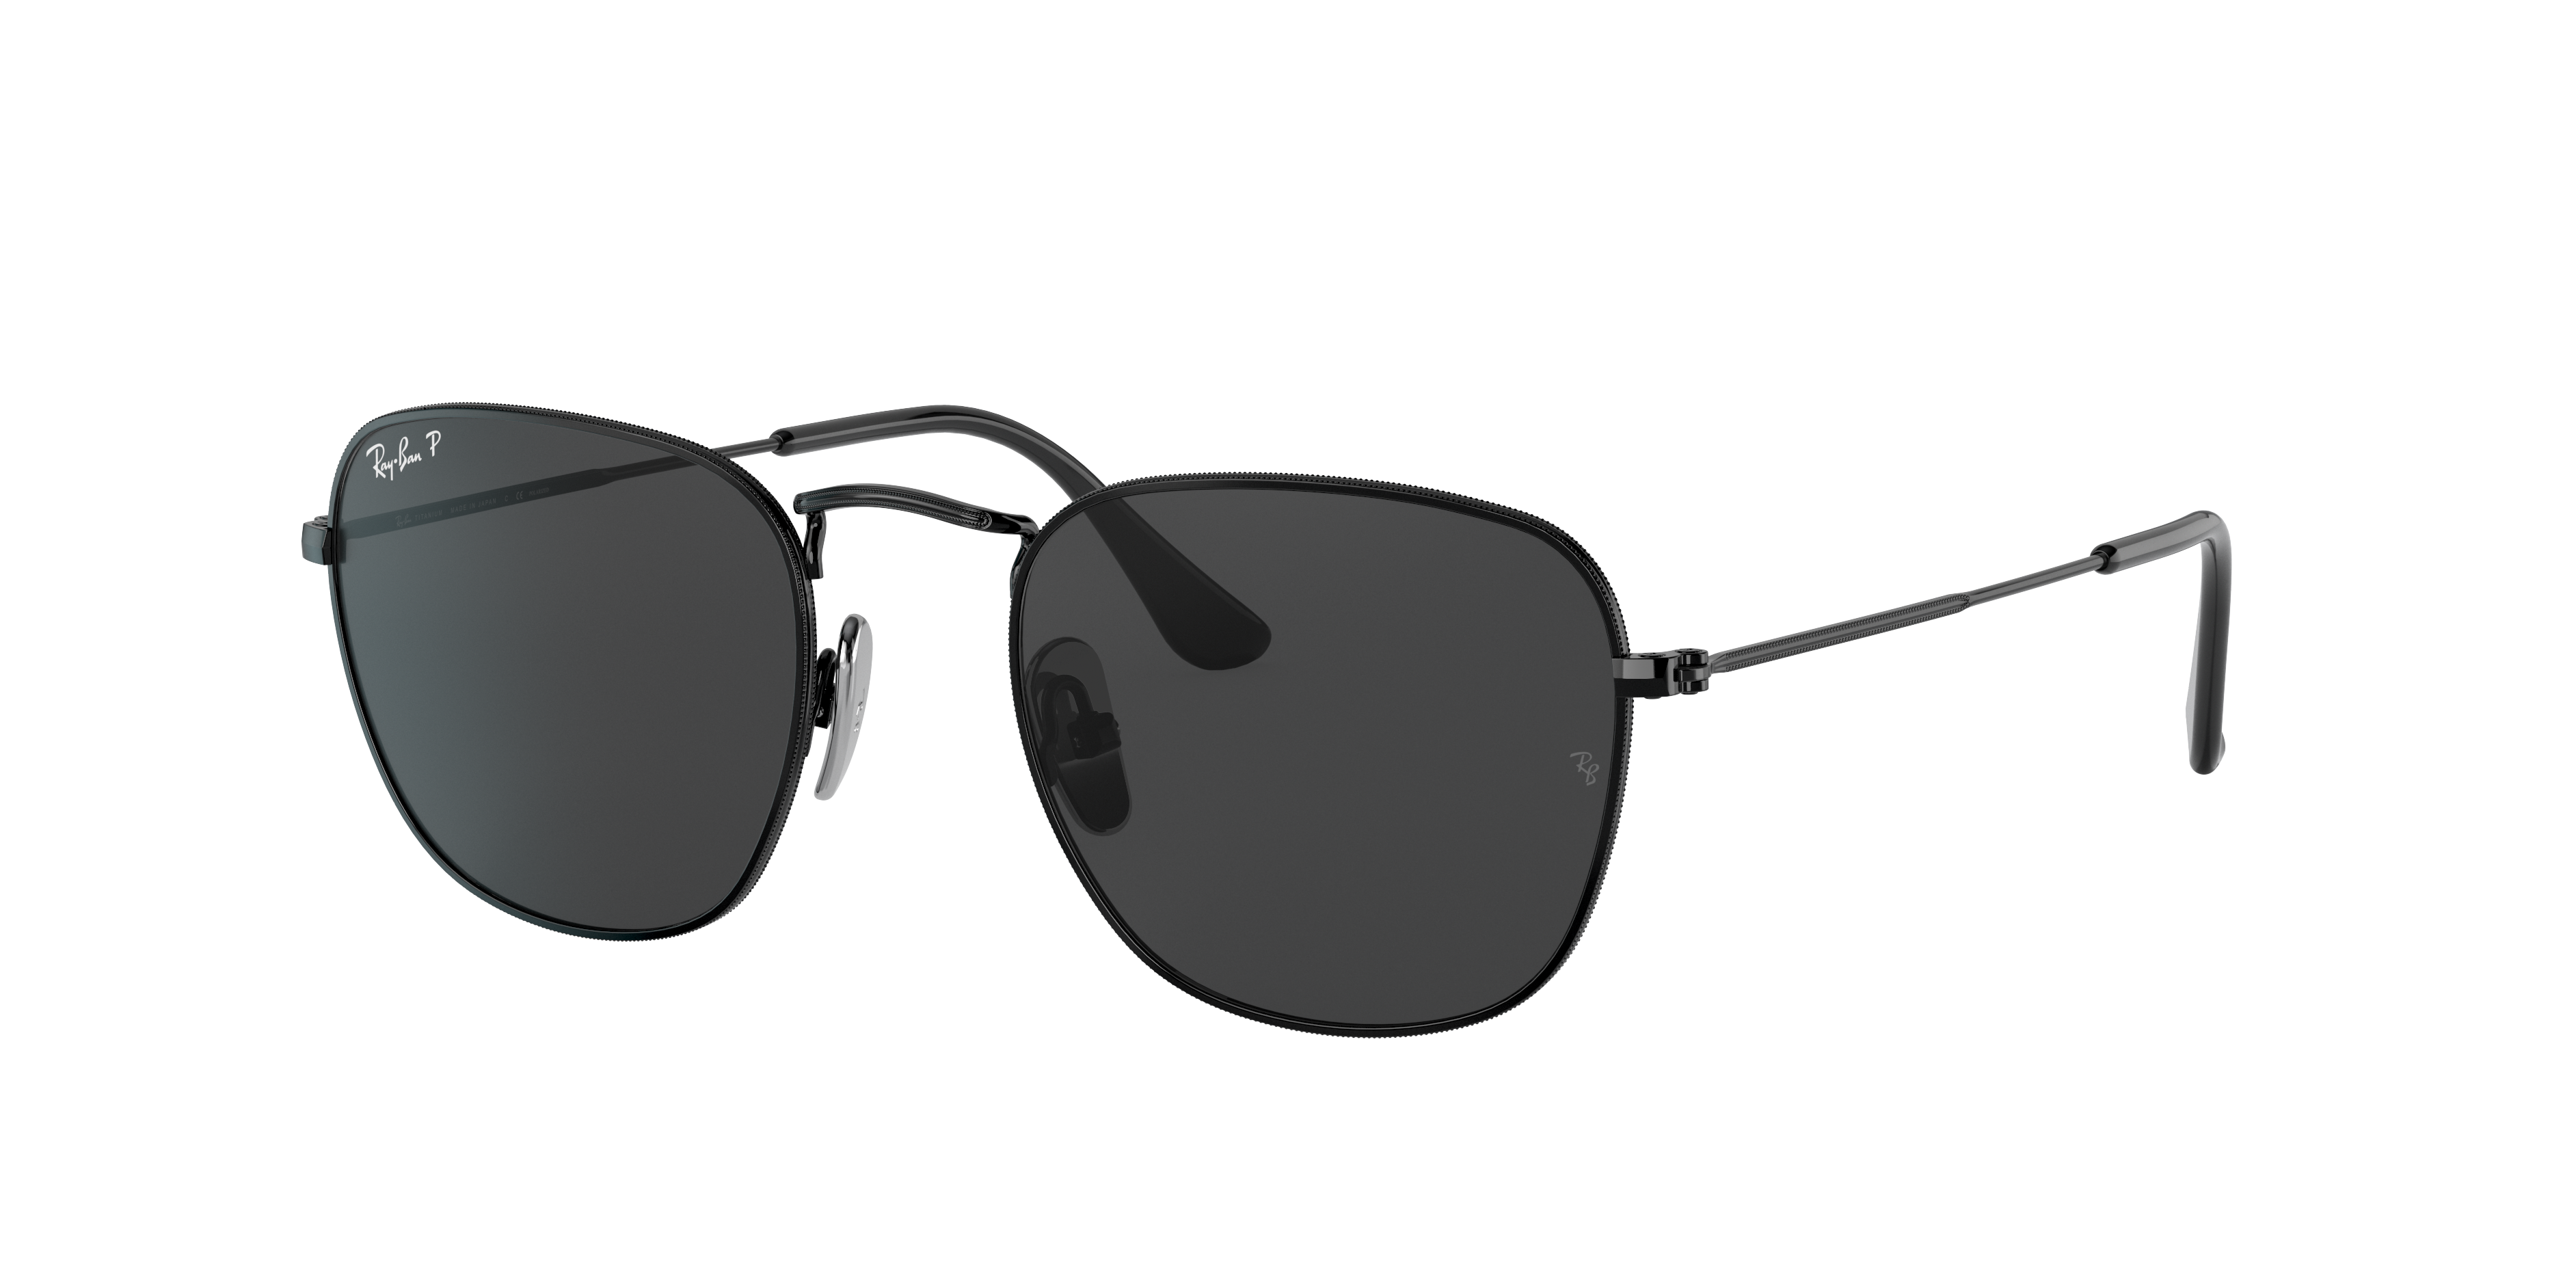 Frank Titanium Limited Edition Sunglasses in Black and Black | Ray-Ban®